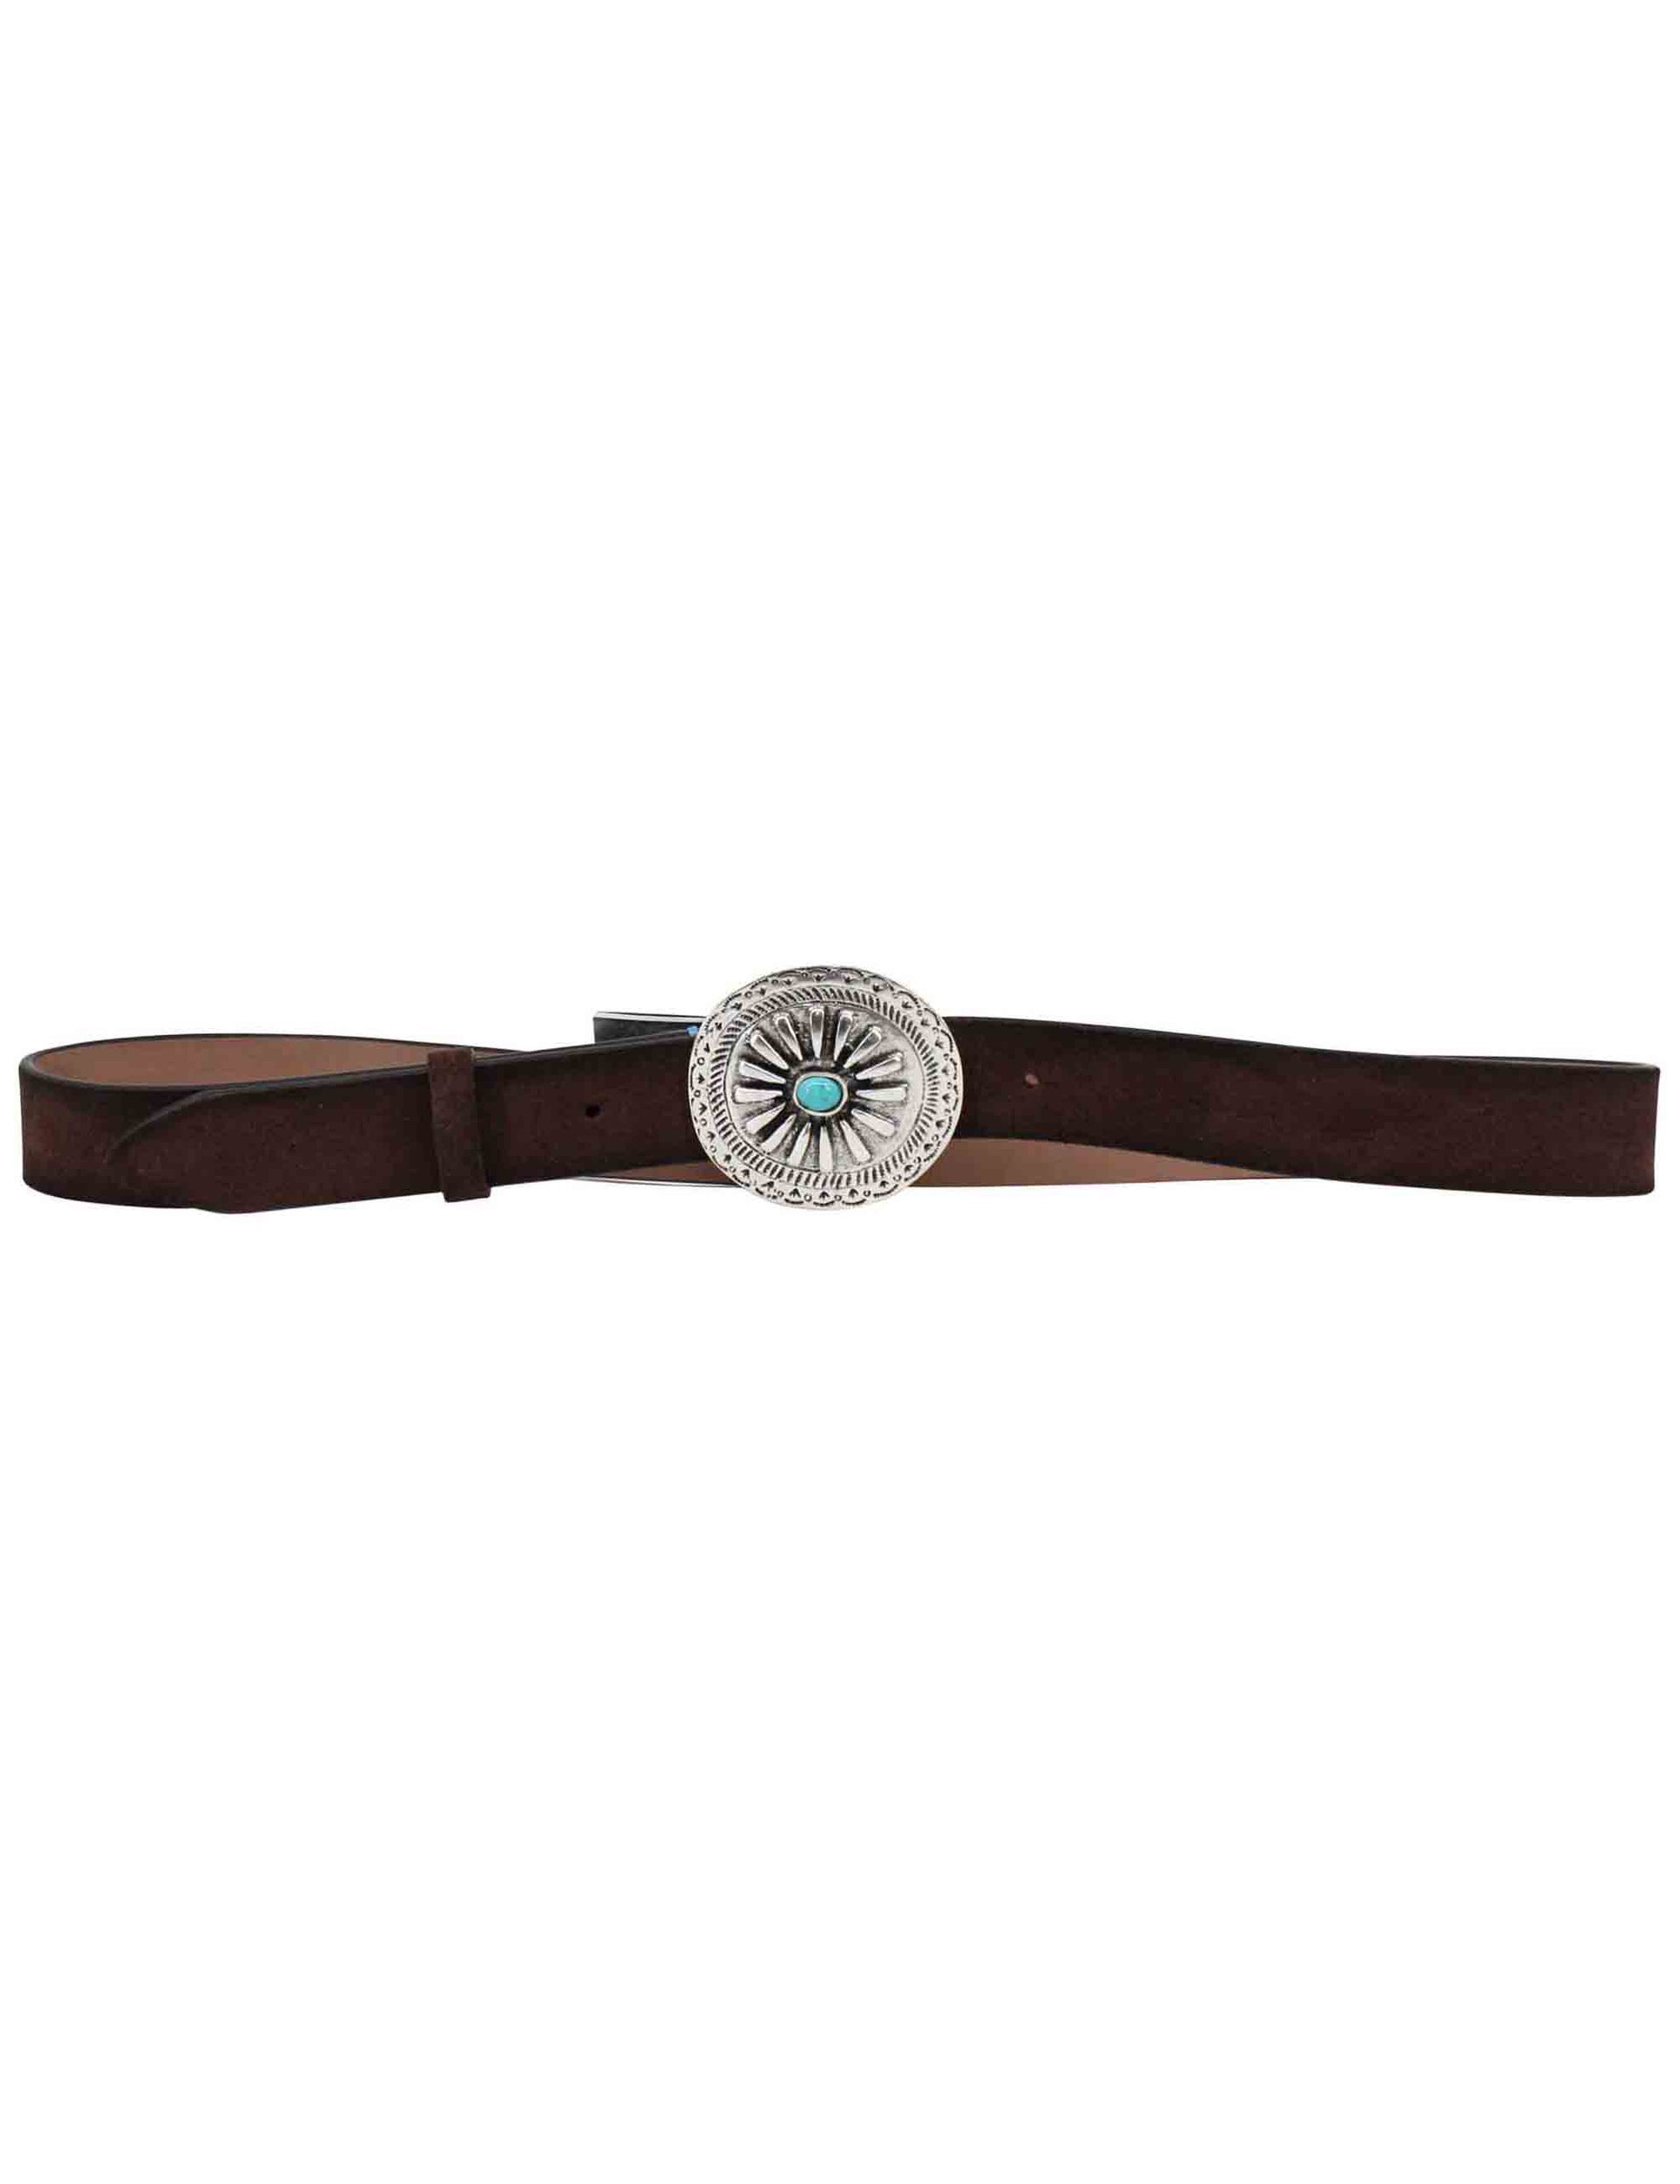 Women's belts in dark brown leather with silver and turquoise buckle